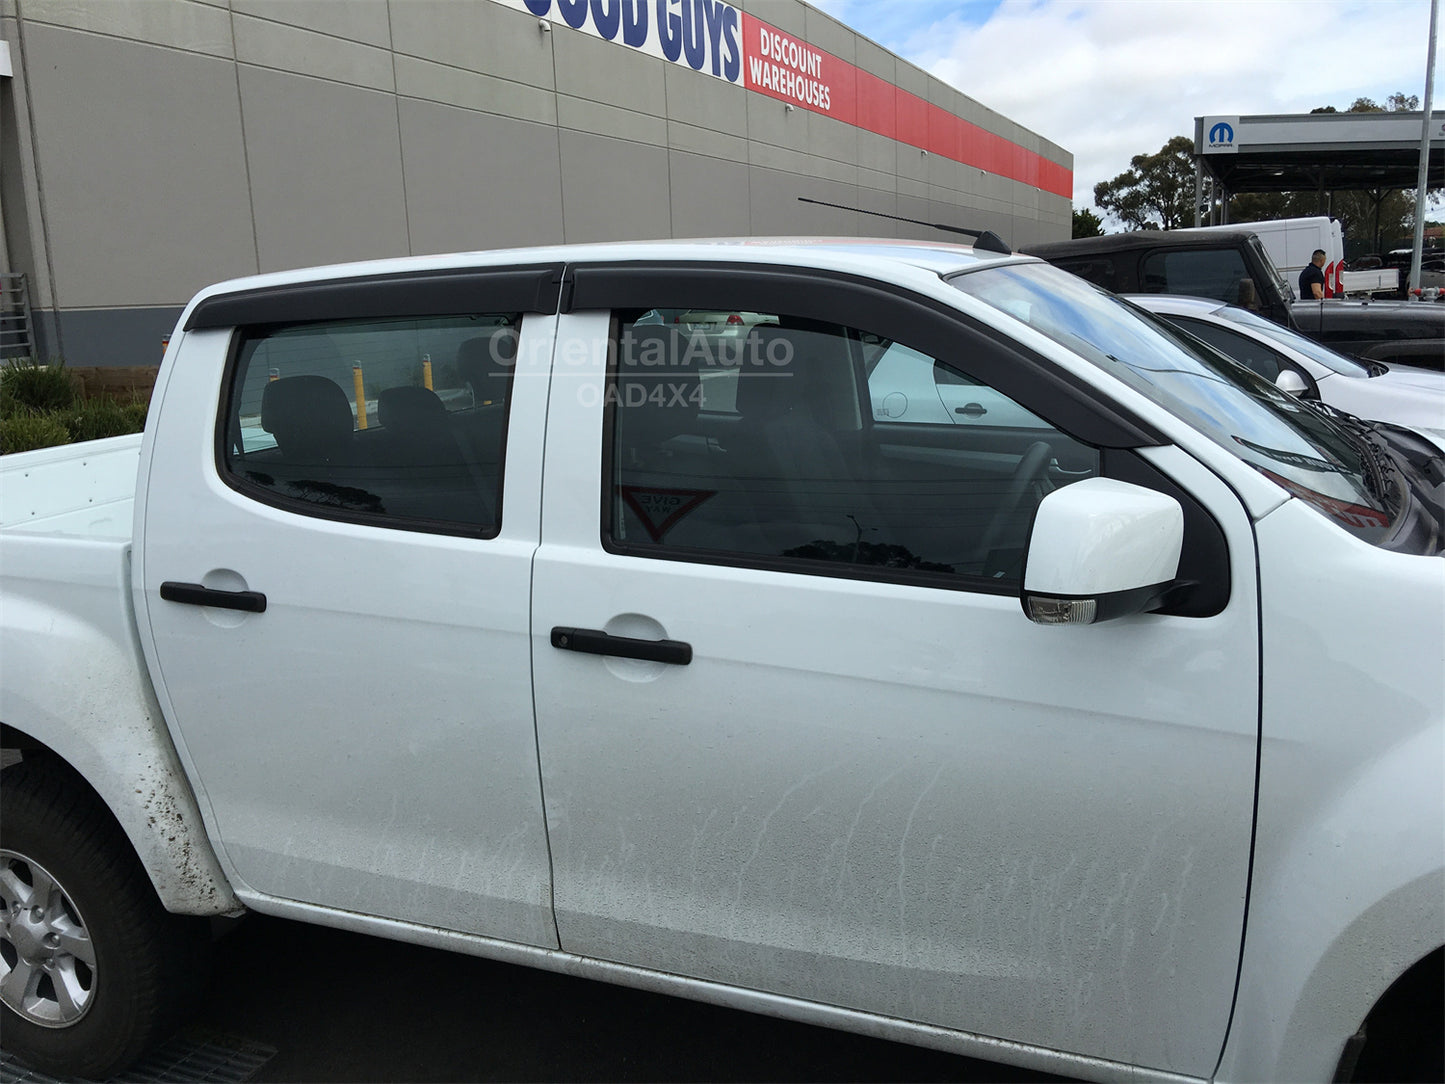 Bonnet Protector & Injection Weathershields Weather Shields Window Visors for Holden Colorado RG Series Dual Cab 2012-2016